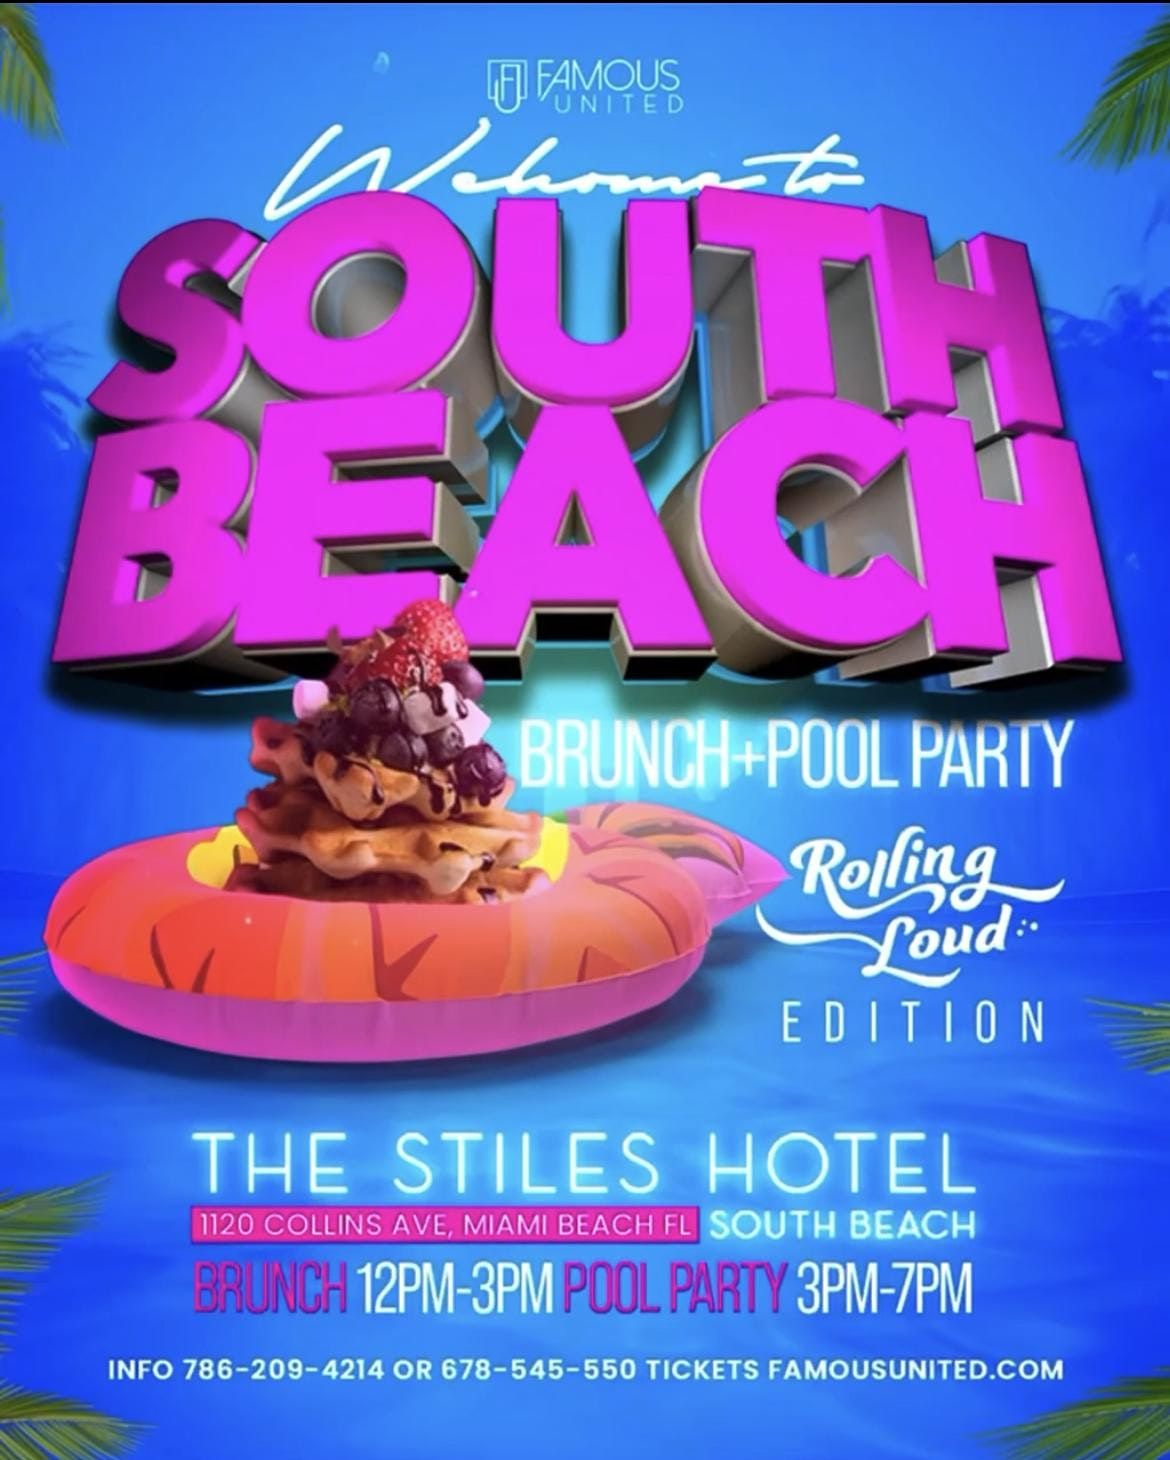 WELCOME TO SOUTH BEACH BRUNCH+POOL PARTY ROLLING LOUD EDITION